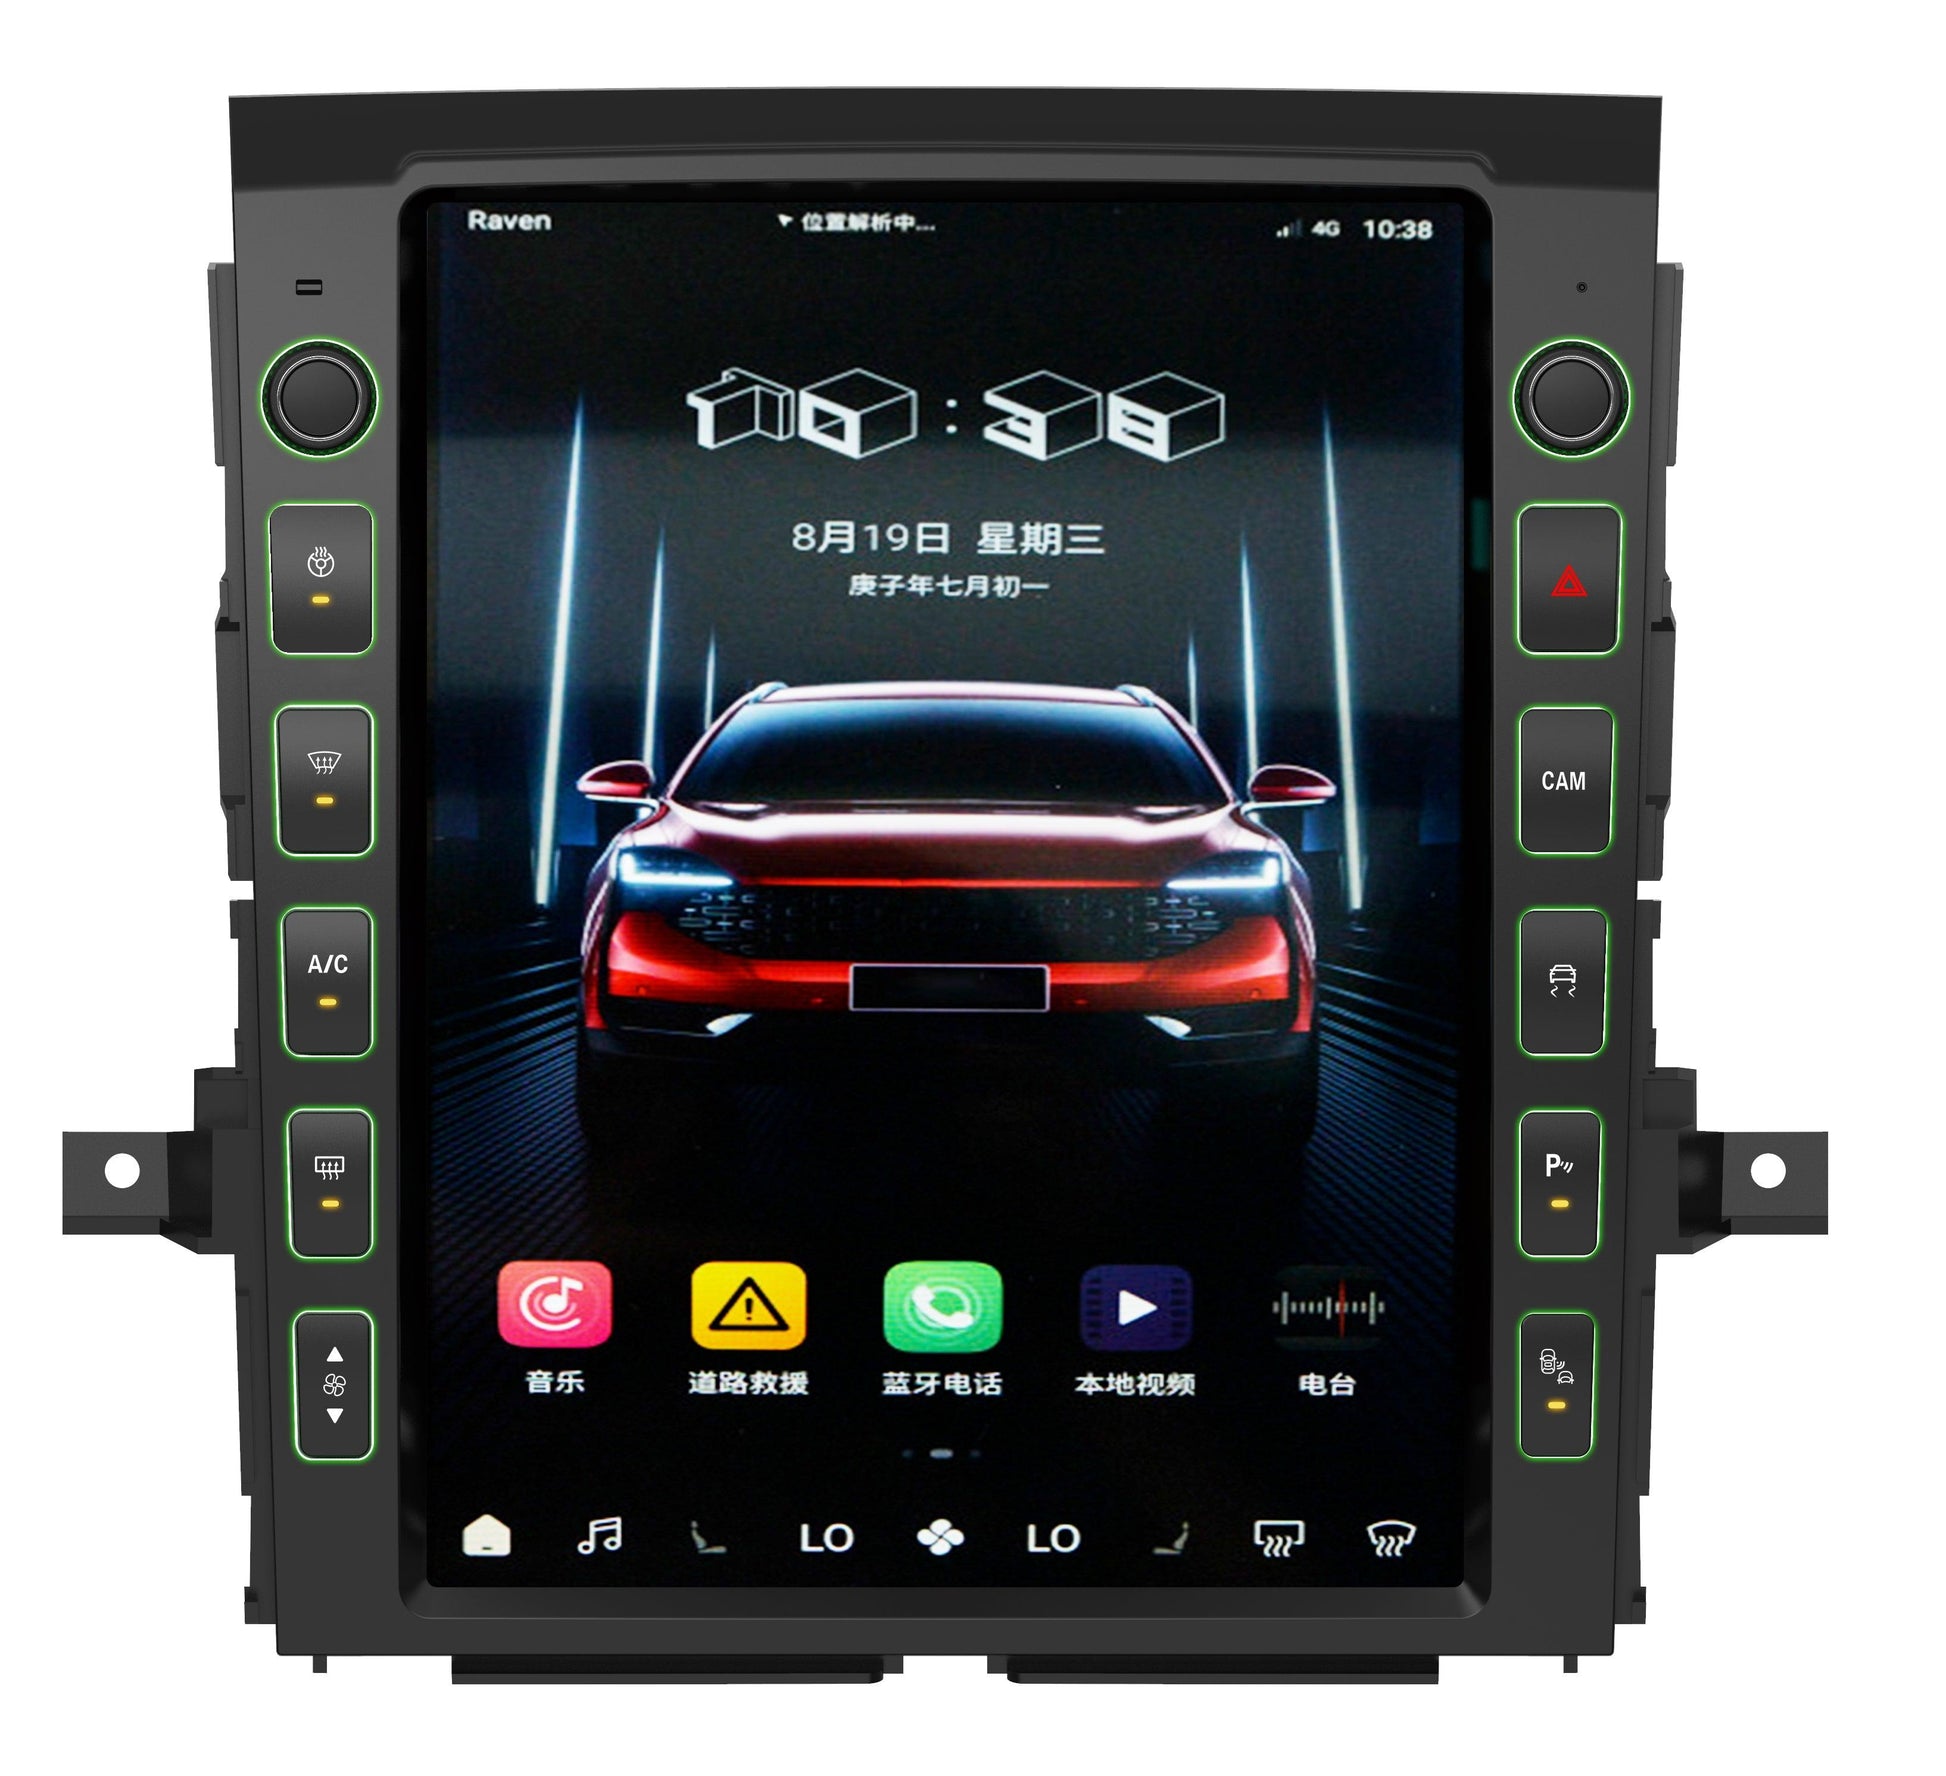 13” Android 12 Vertical Screen Navigation Radio for Nissan Titan (XD) 2016 - 2019 - Smart Car Stereo Radio Navigation | In-Dash audio/video players online - Phoenix Automotive